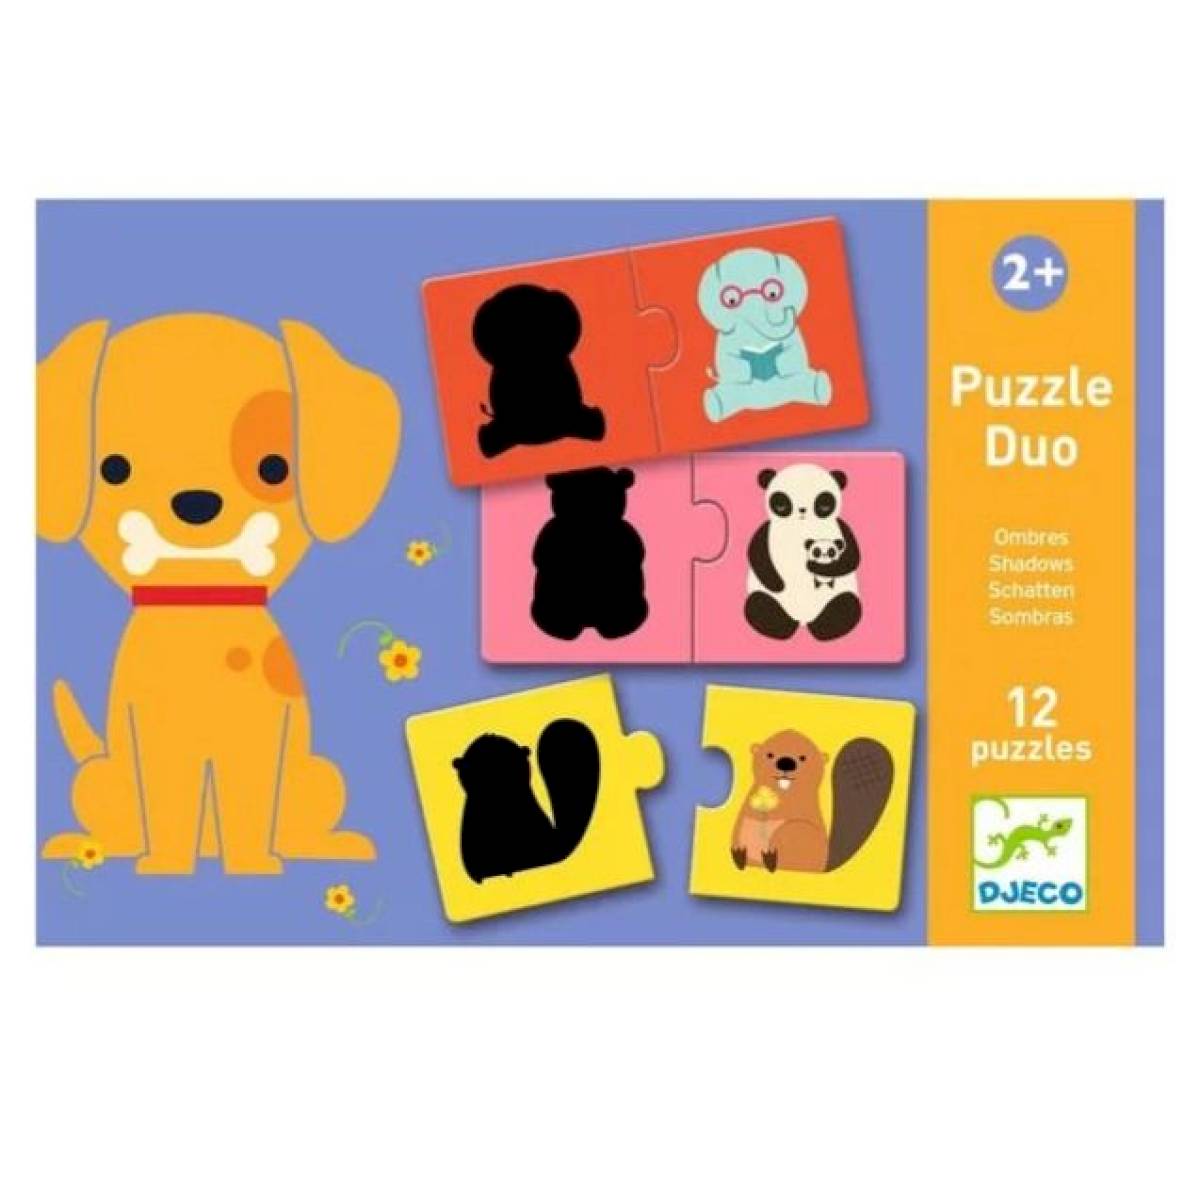 Puzzle Duo Ombres